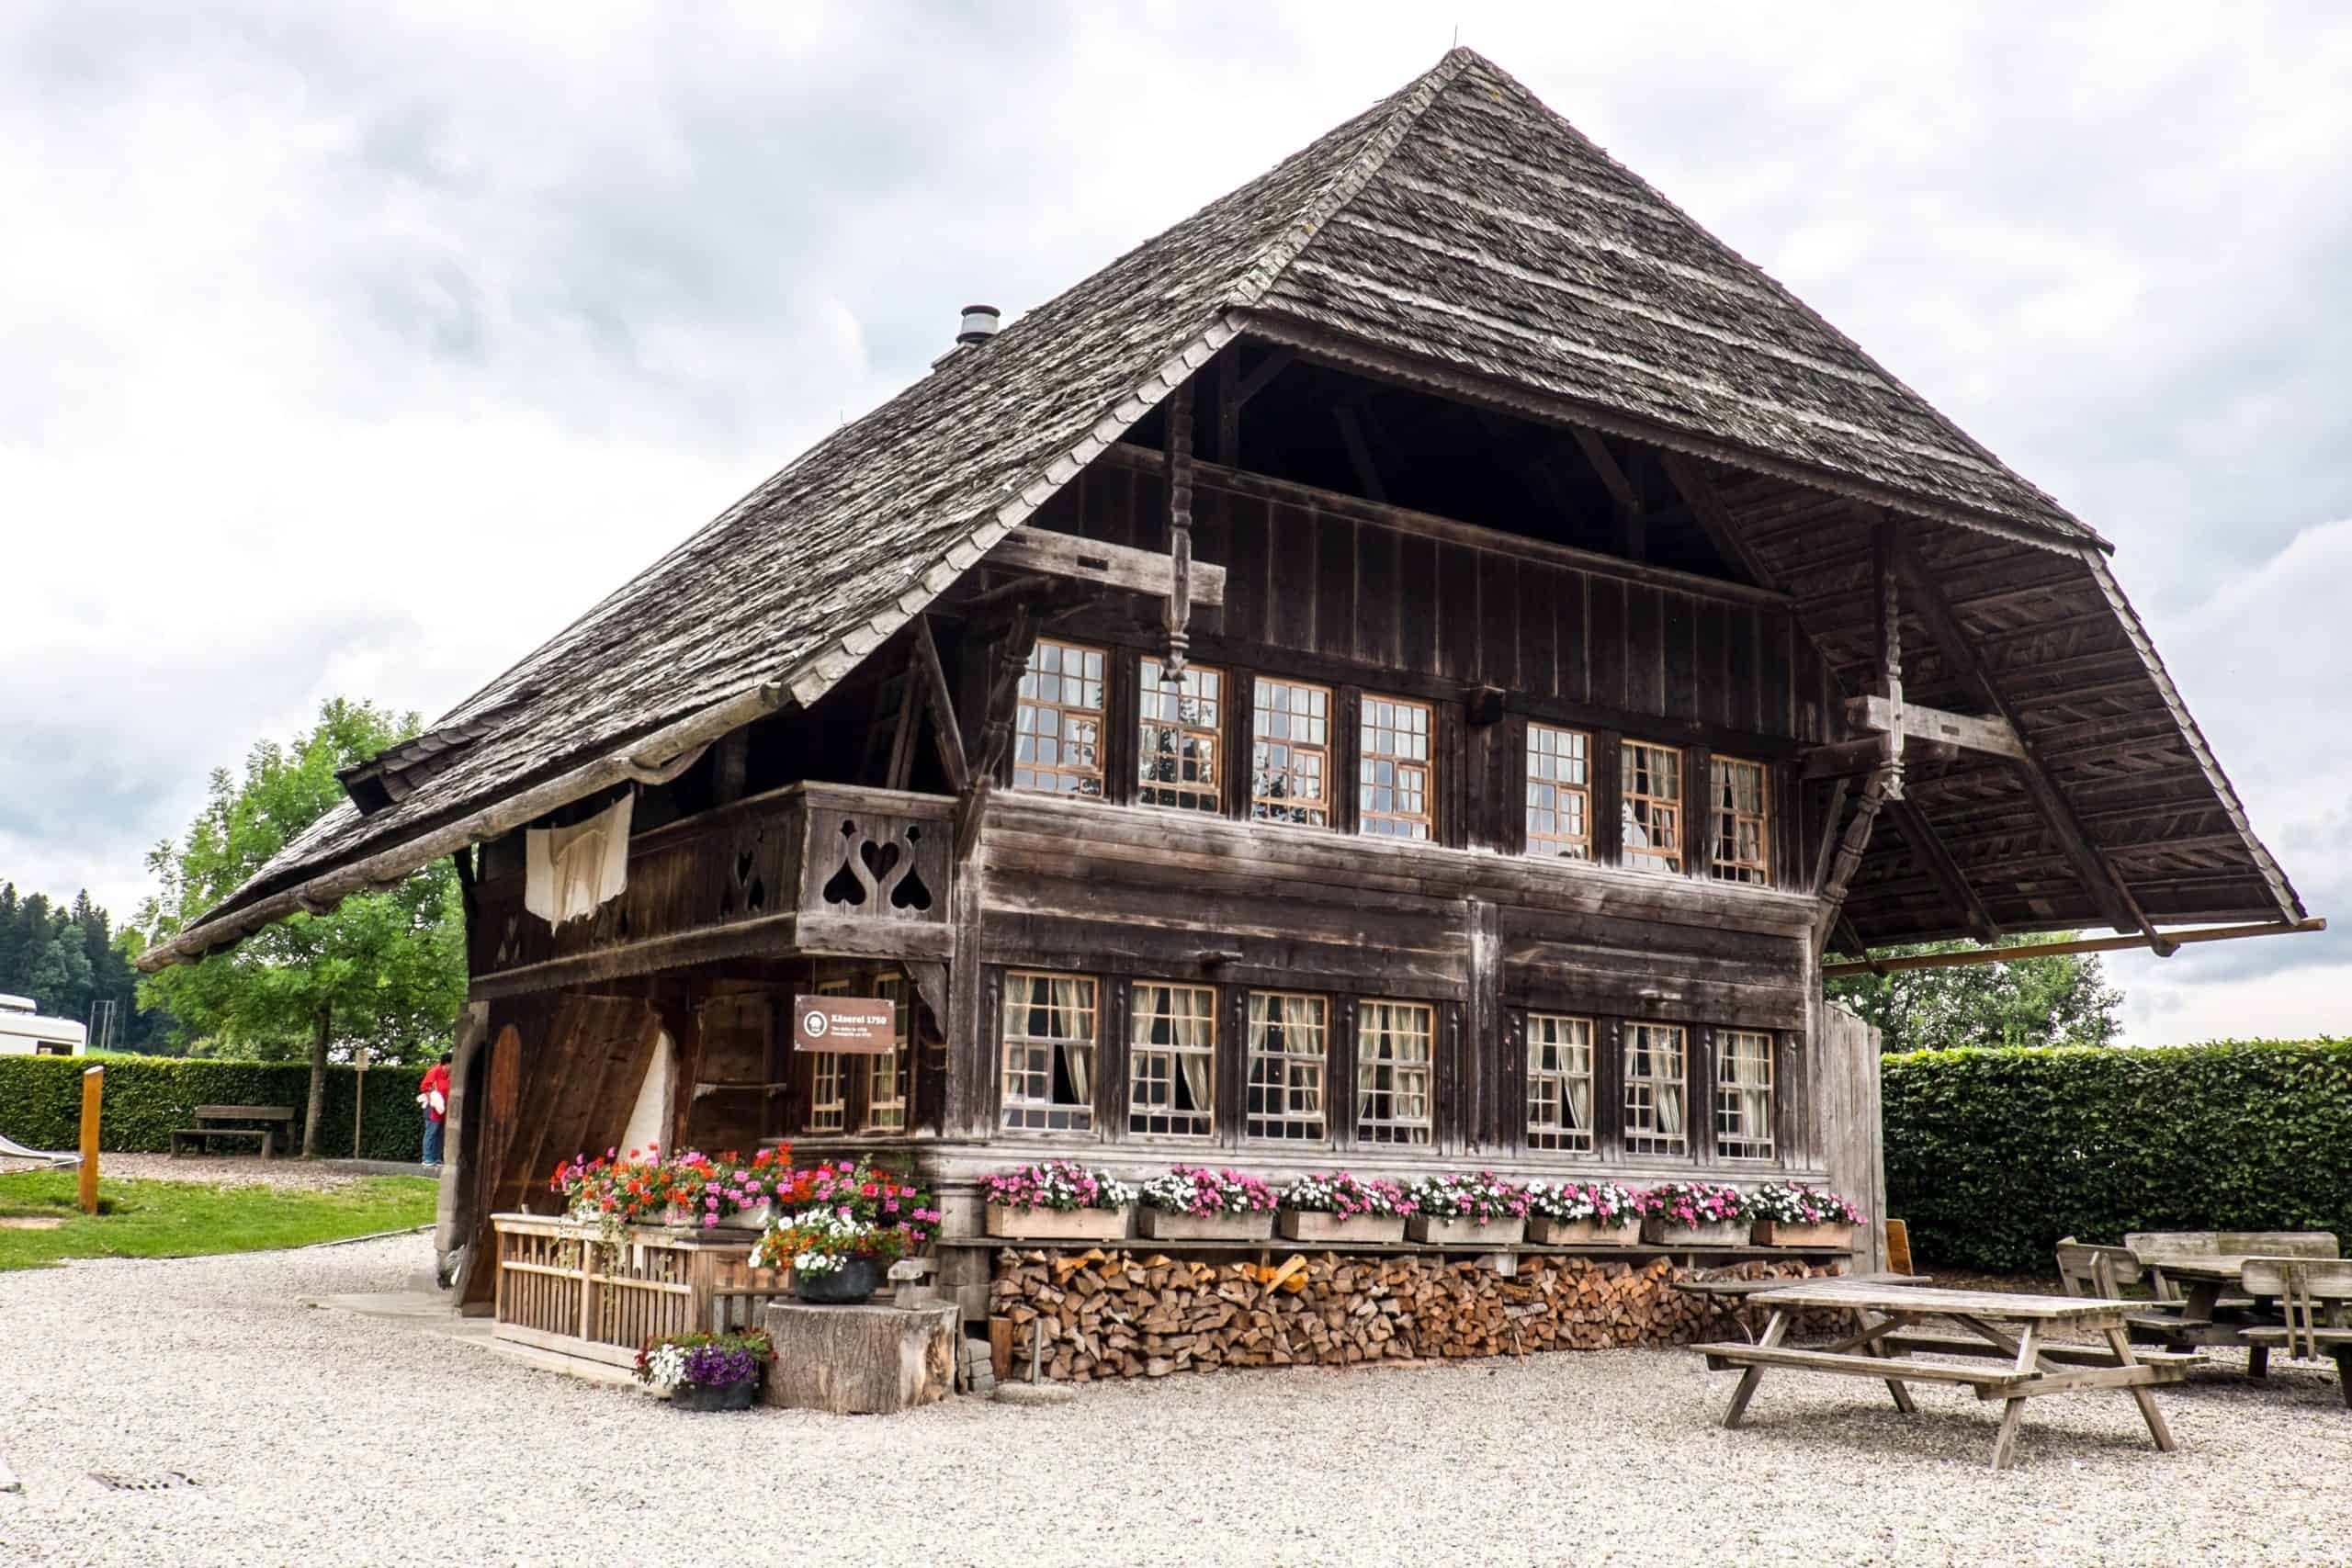 The first old dairy house in the Emmental Valley, Switzerland